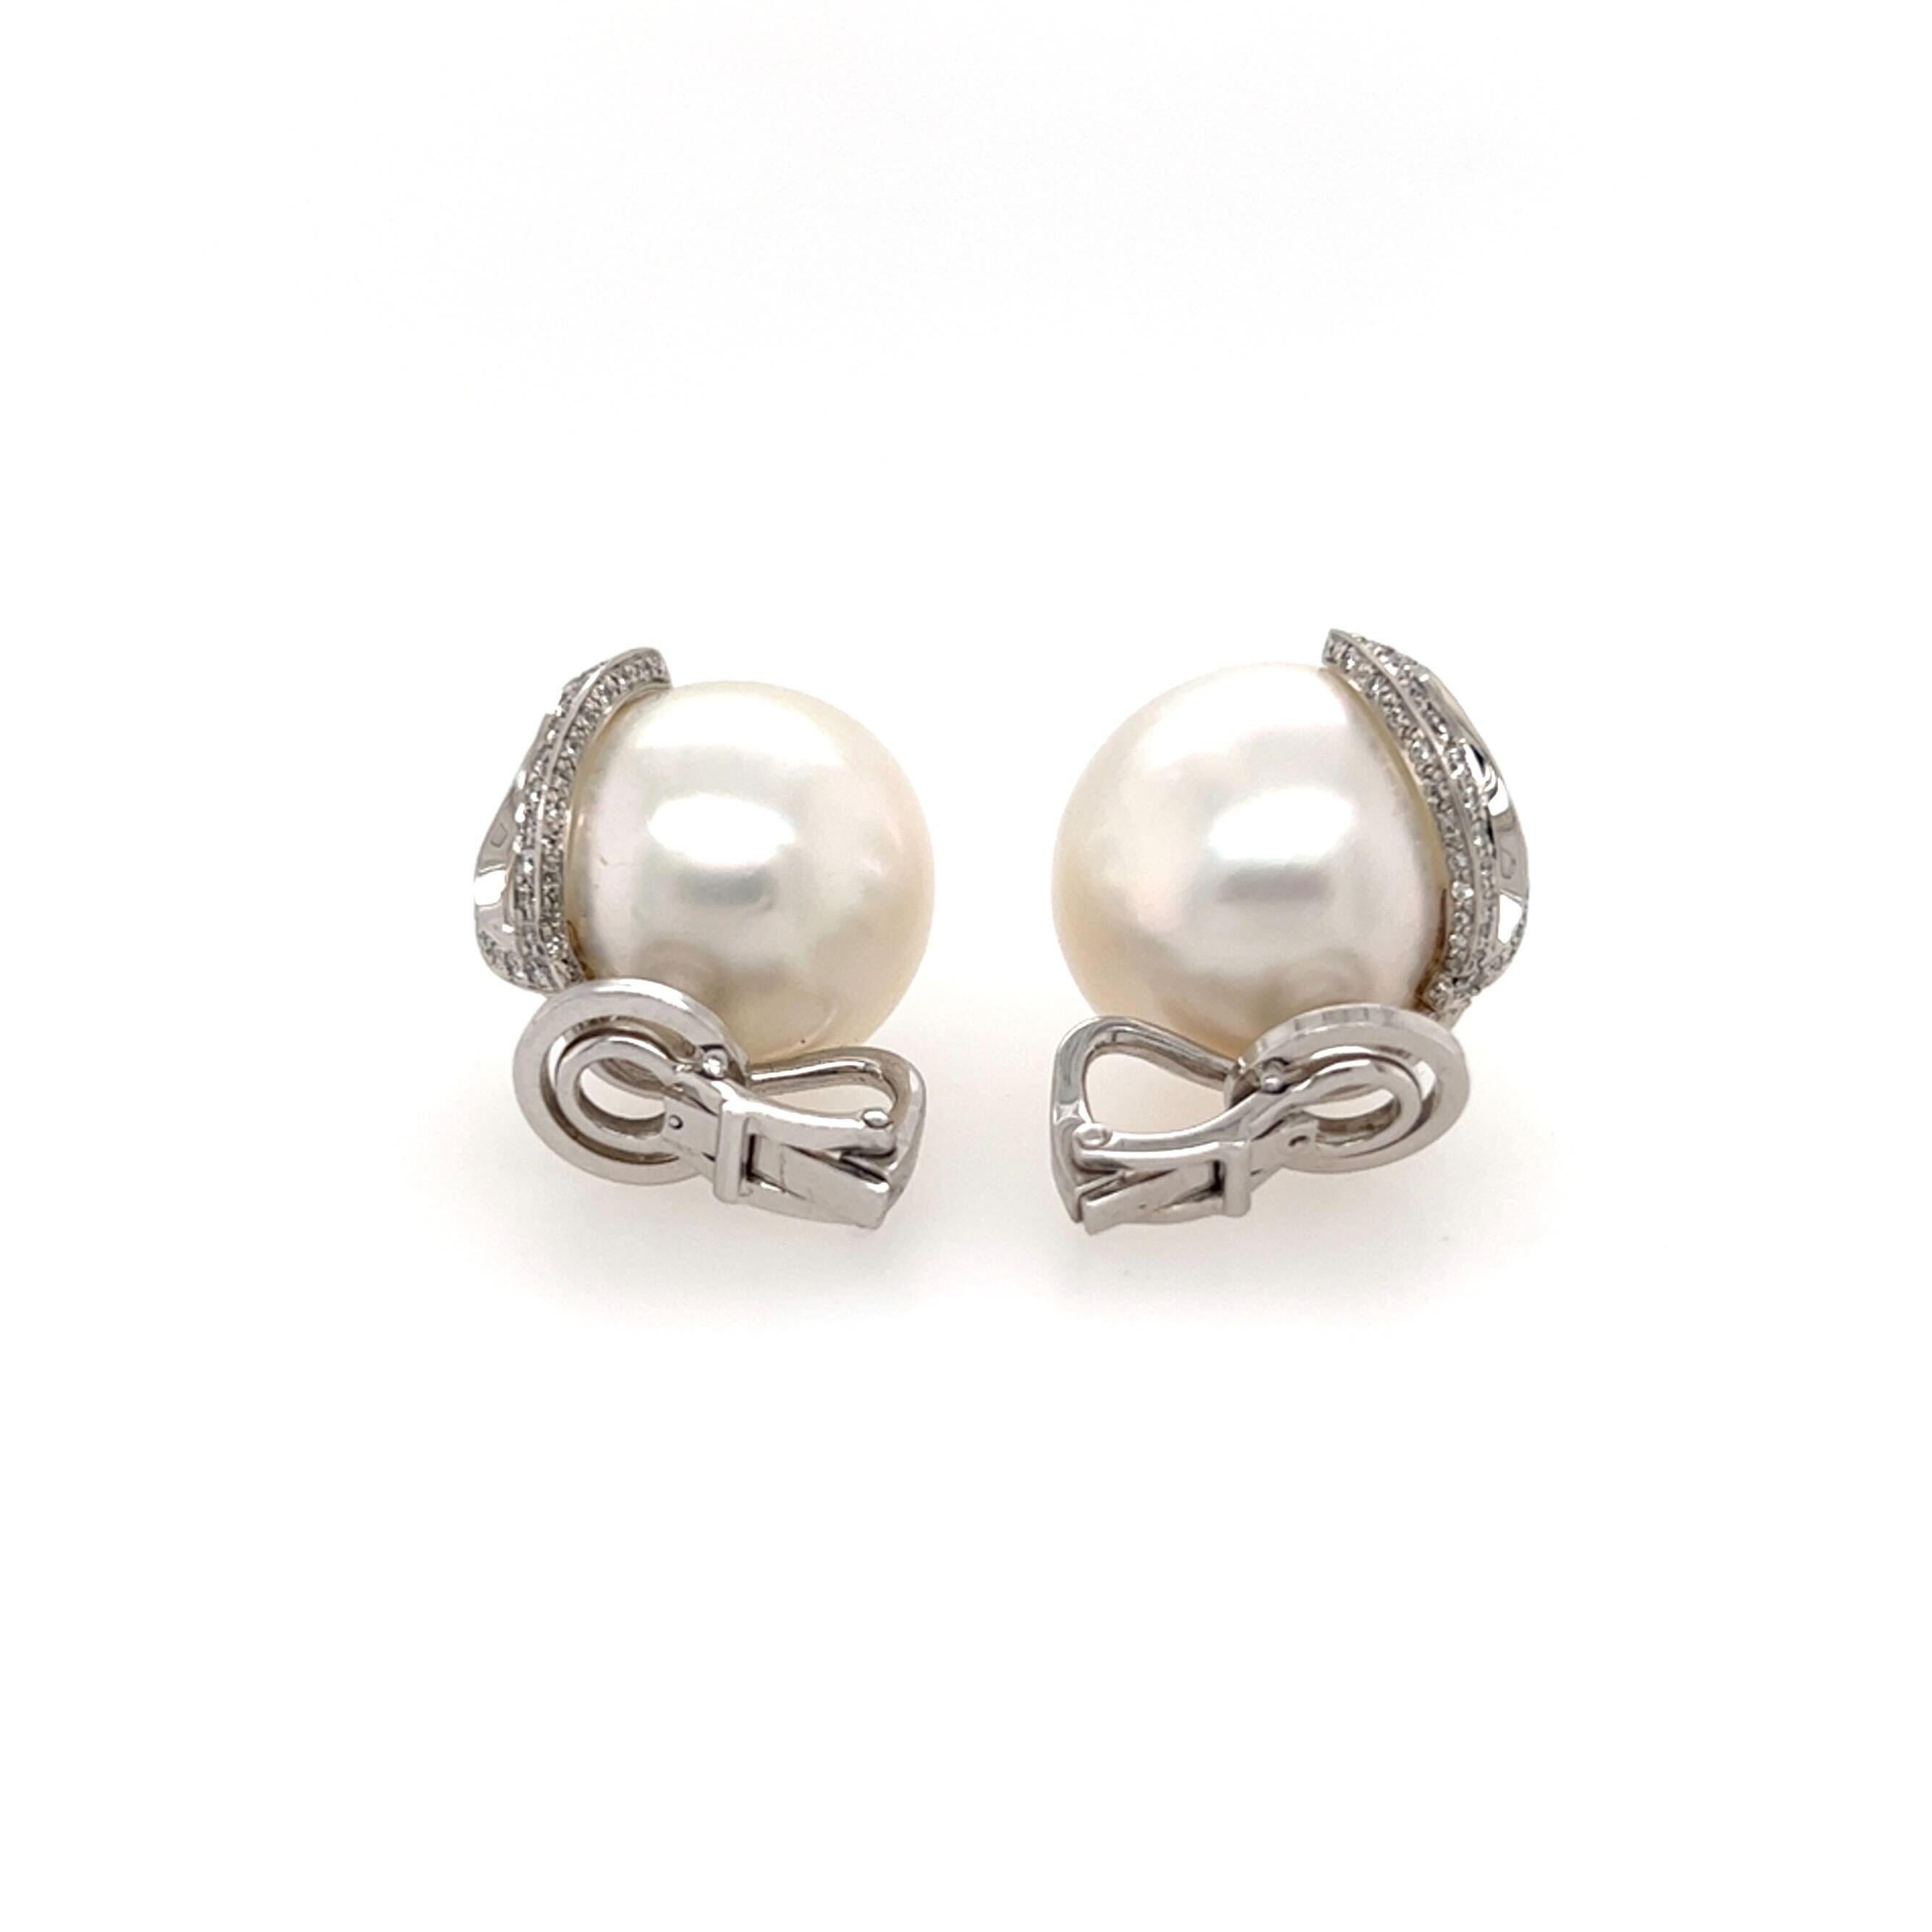 A pair of 14 karat white gold, pearl and diamond earclips.  Each earclip fashioned as a South Sea pearl measuring approximately 17.3 mm. applied with an open oval set on the top and outer edges with approximately fifty (50) brilliant cut diamonds. 